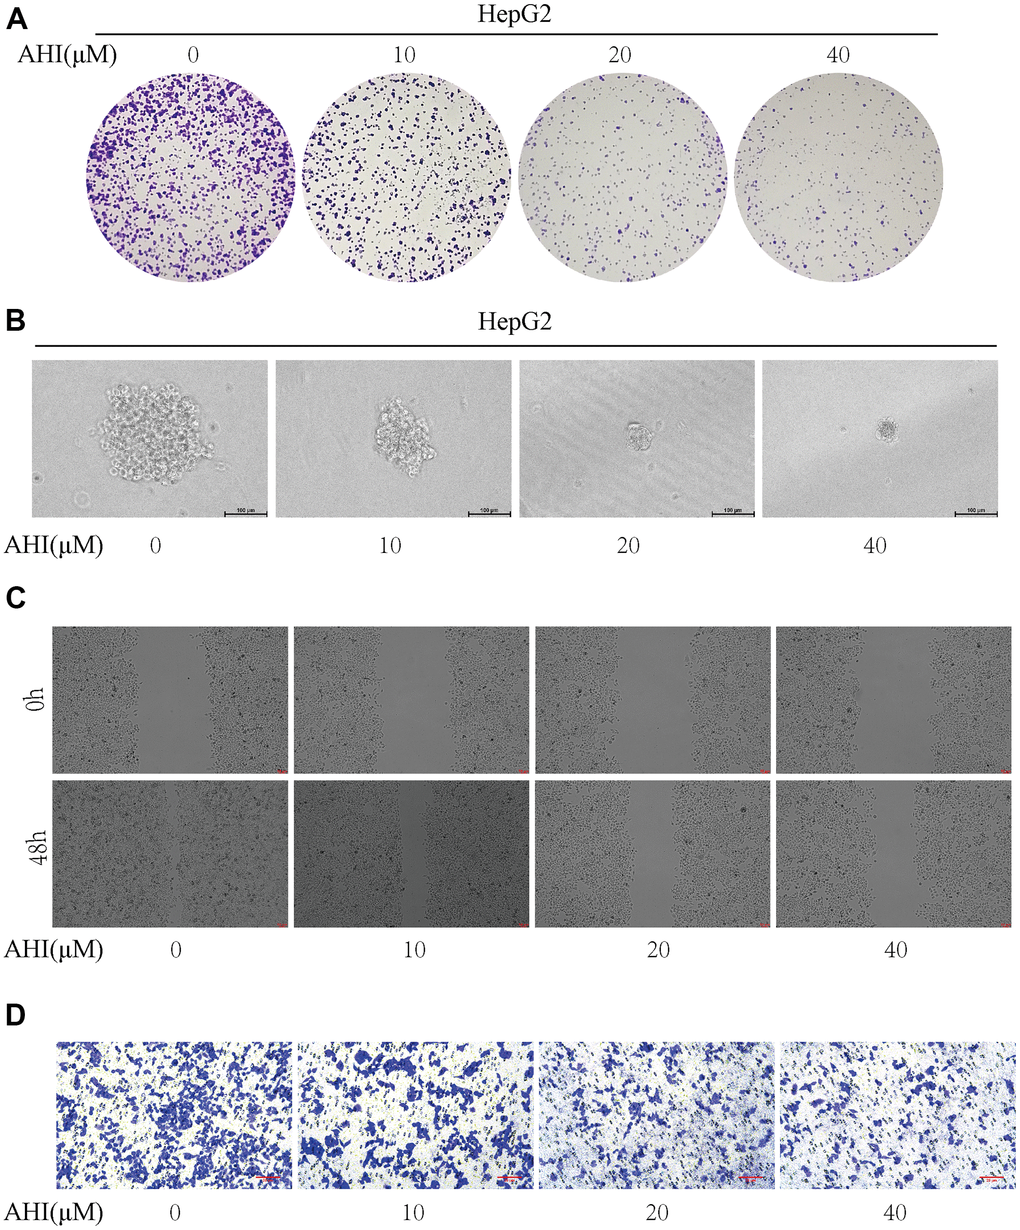 AHI has potential anti-liver cancer properties. (A) Colony formation of HepG2 after treatment with different concentrations of AHI. (B) Sphere formation of HepG2 after treatment with different concentrations of AHI. (C) Effects of AHI on the migration of HCC cell. (D) Effects of AHI on the invasion of HCC cell.